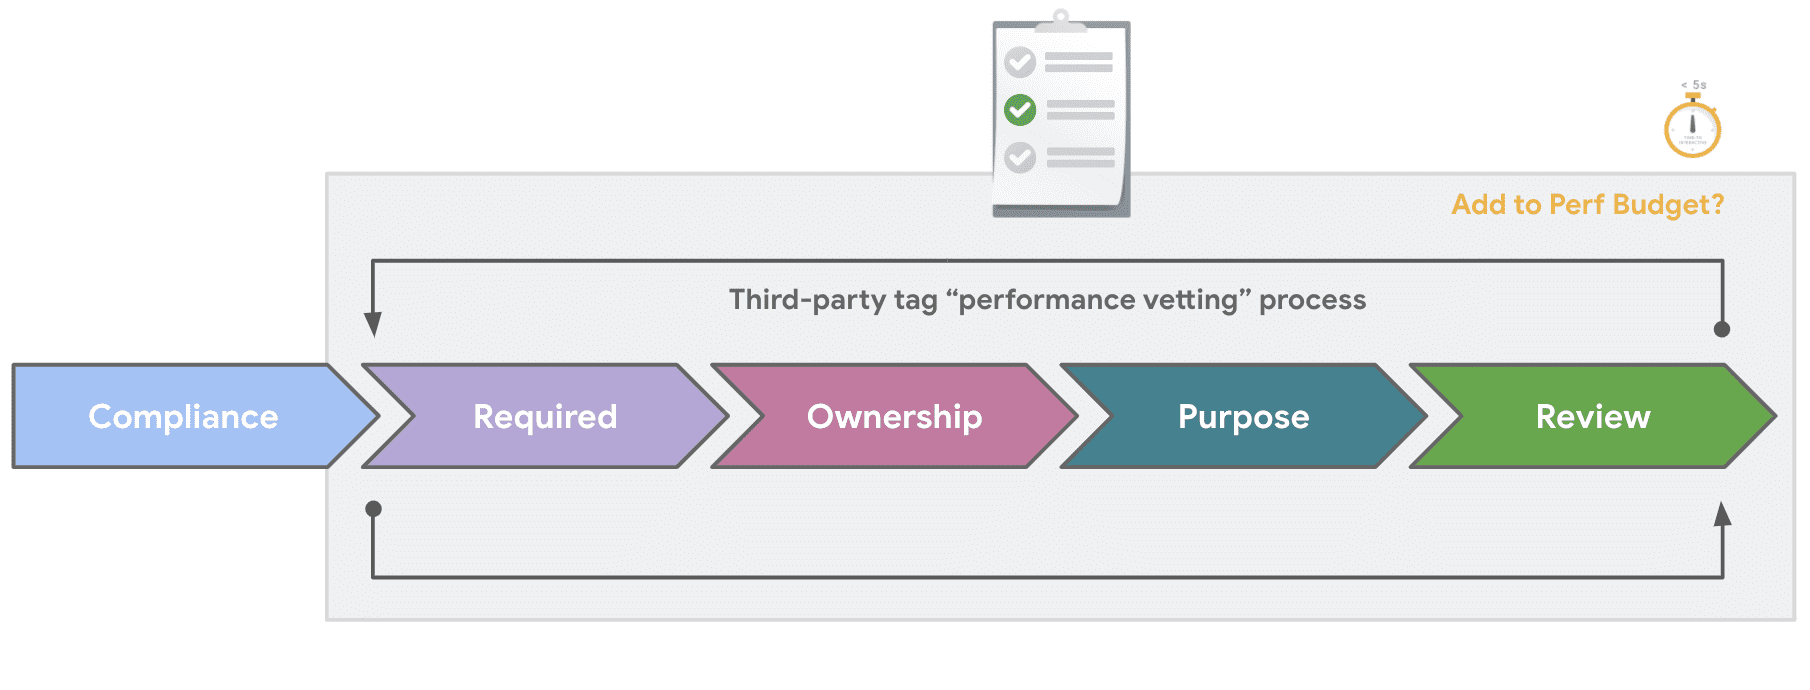 Five arrows, with all five steps of 'Compliance', 'Required', 'Ownership', 'Purpose', and 'Review' completed. Indicating that these are all steps in the performance vetting process.